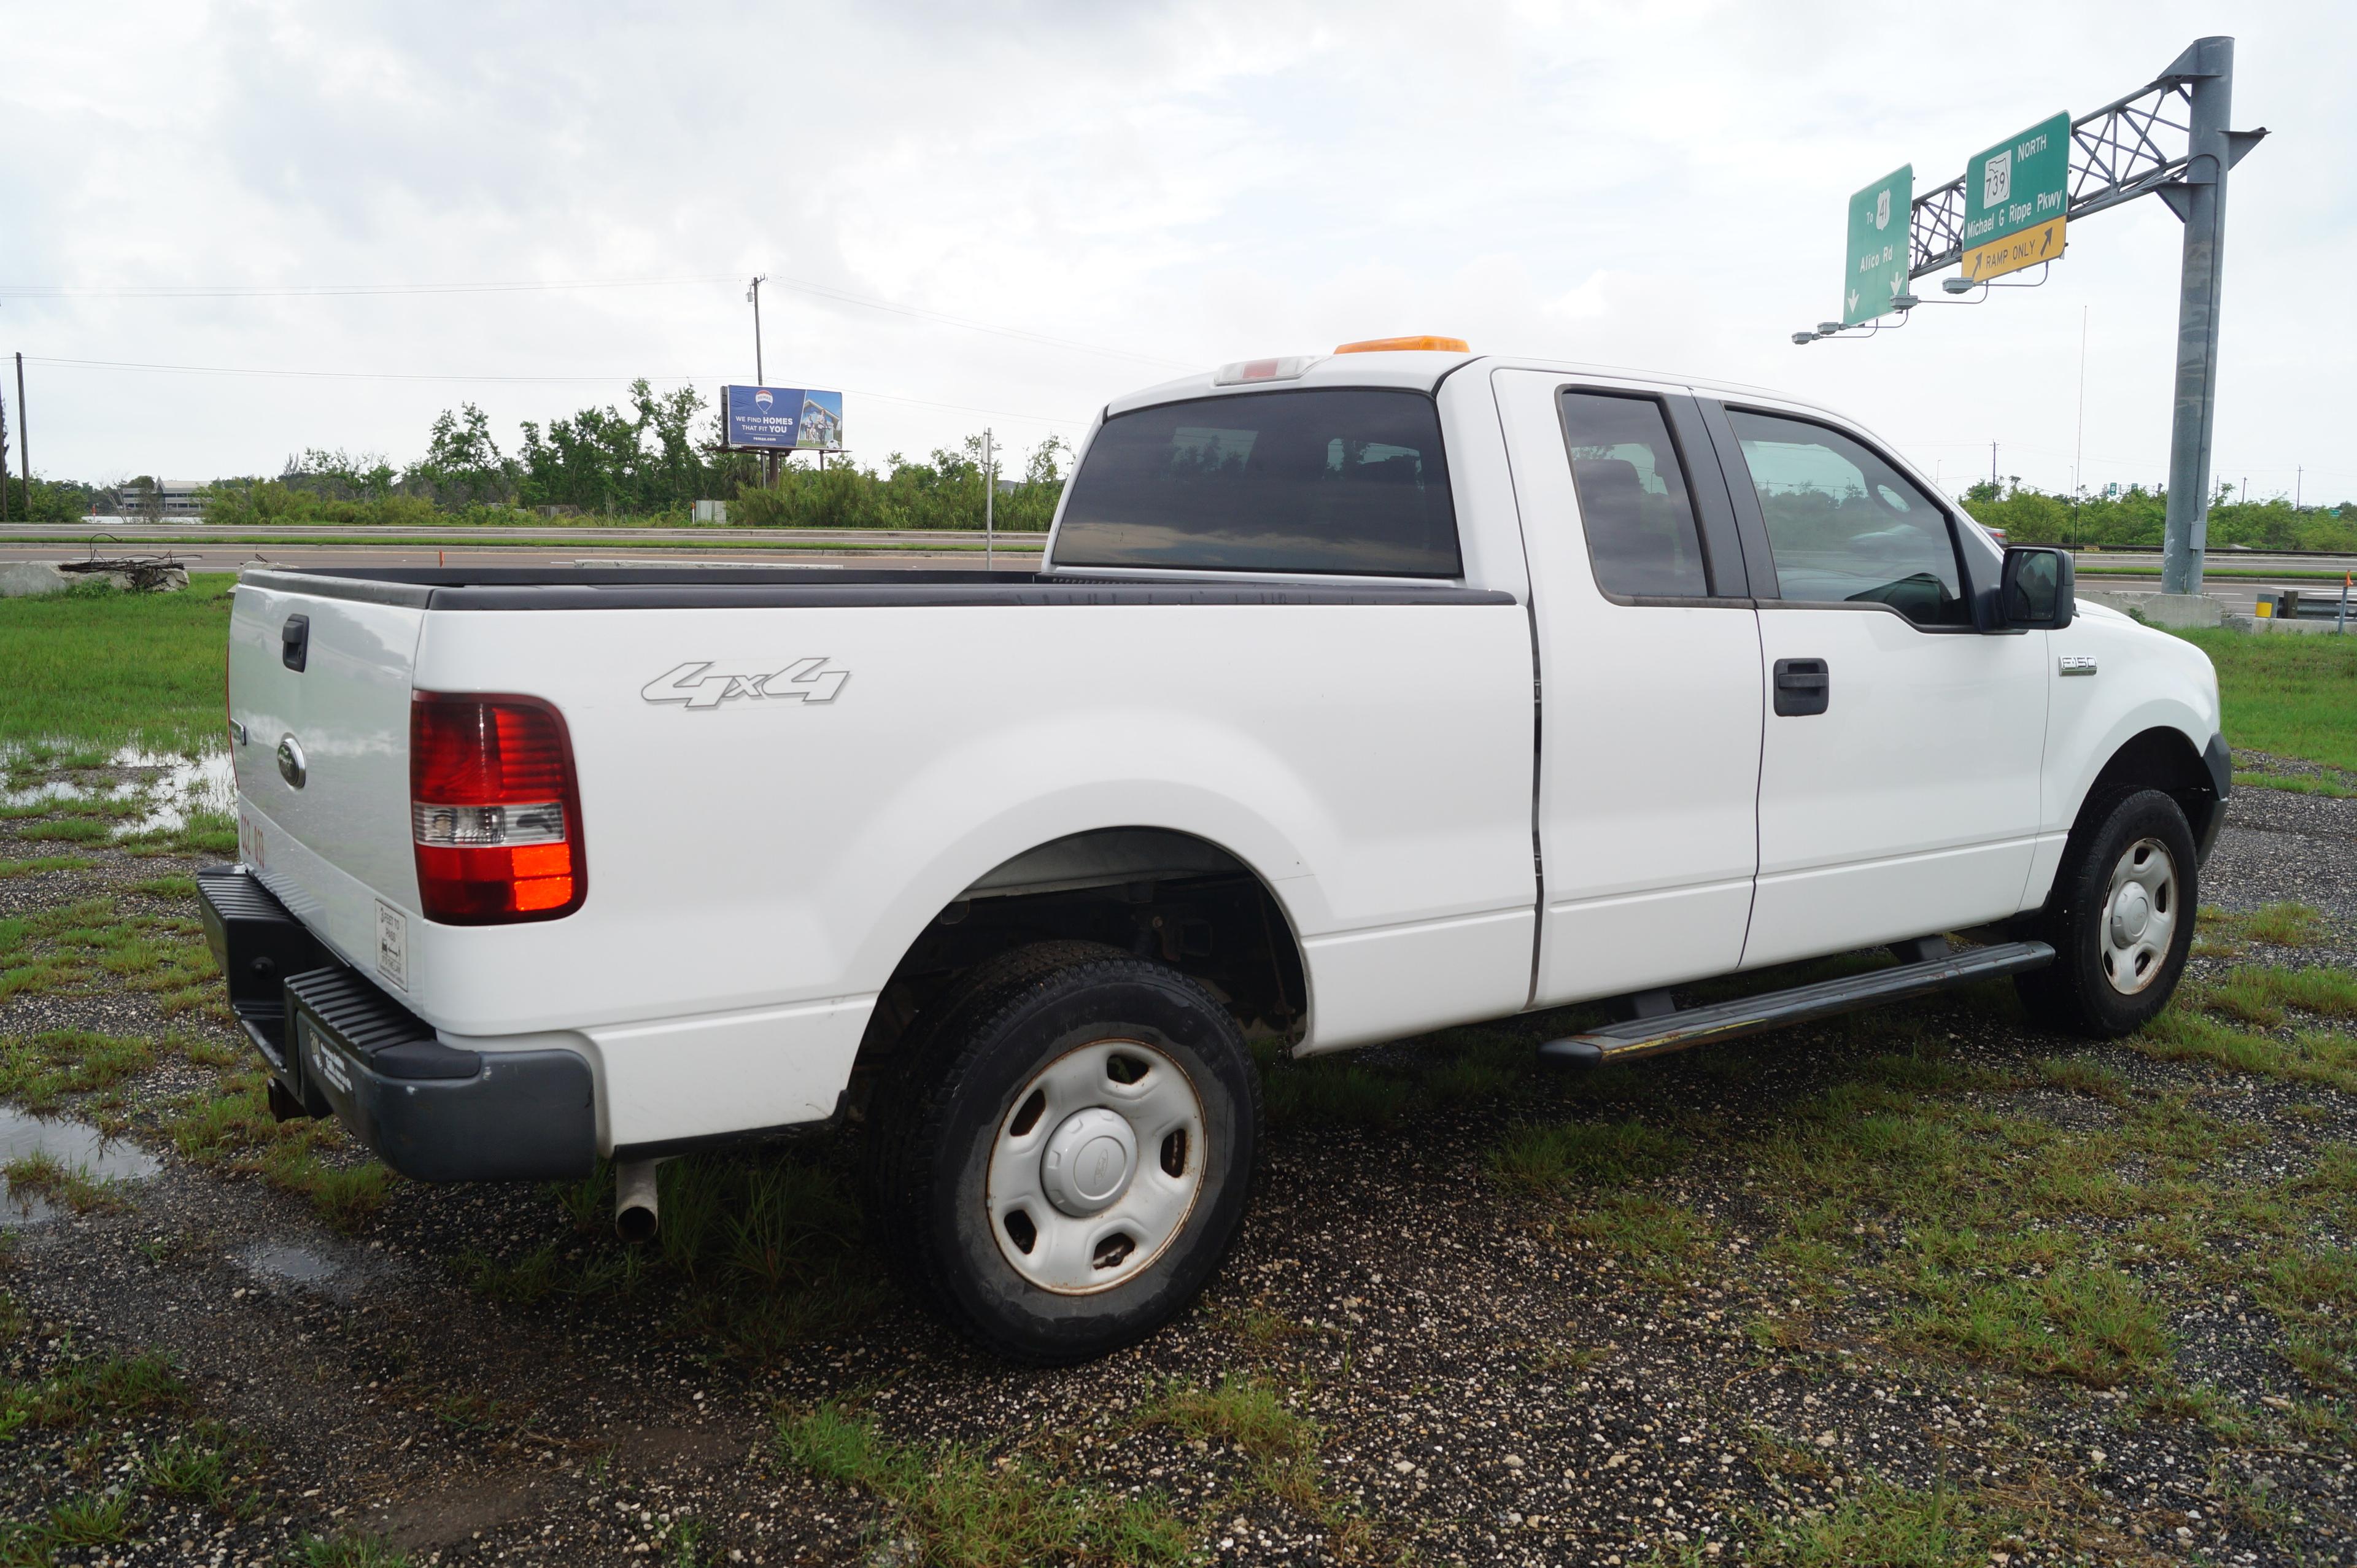 2007 Ford F-150 XL 4x4 Extended Cab Pickup Truck